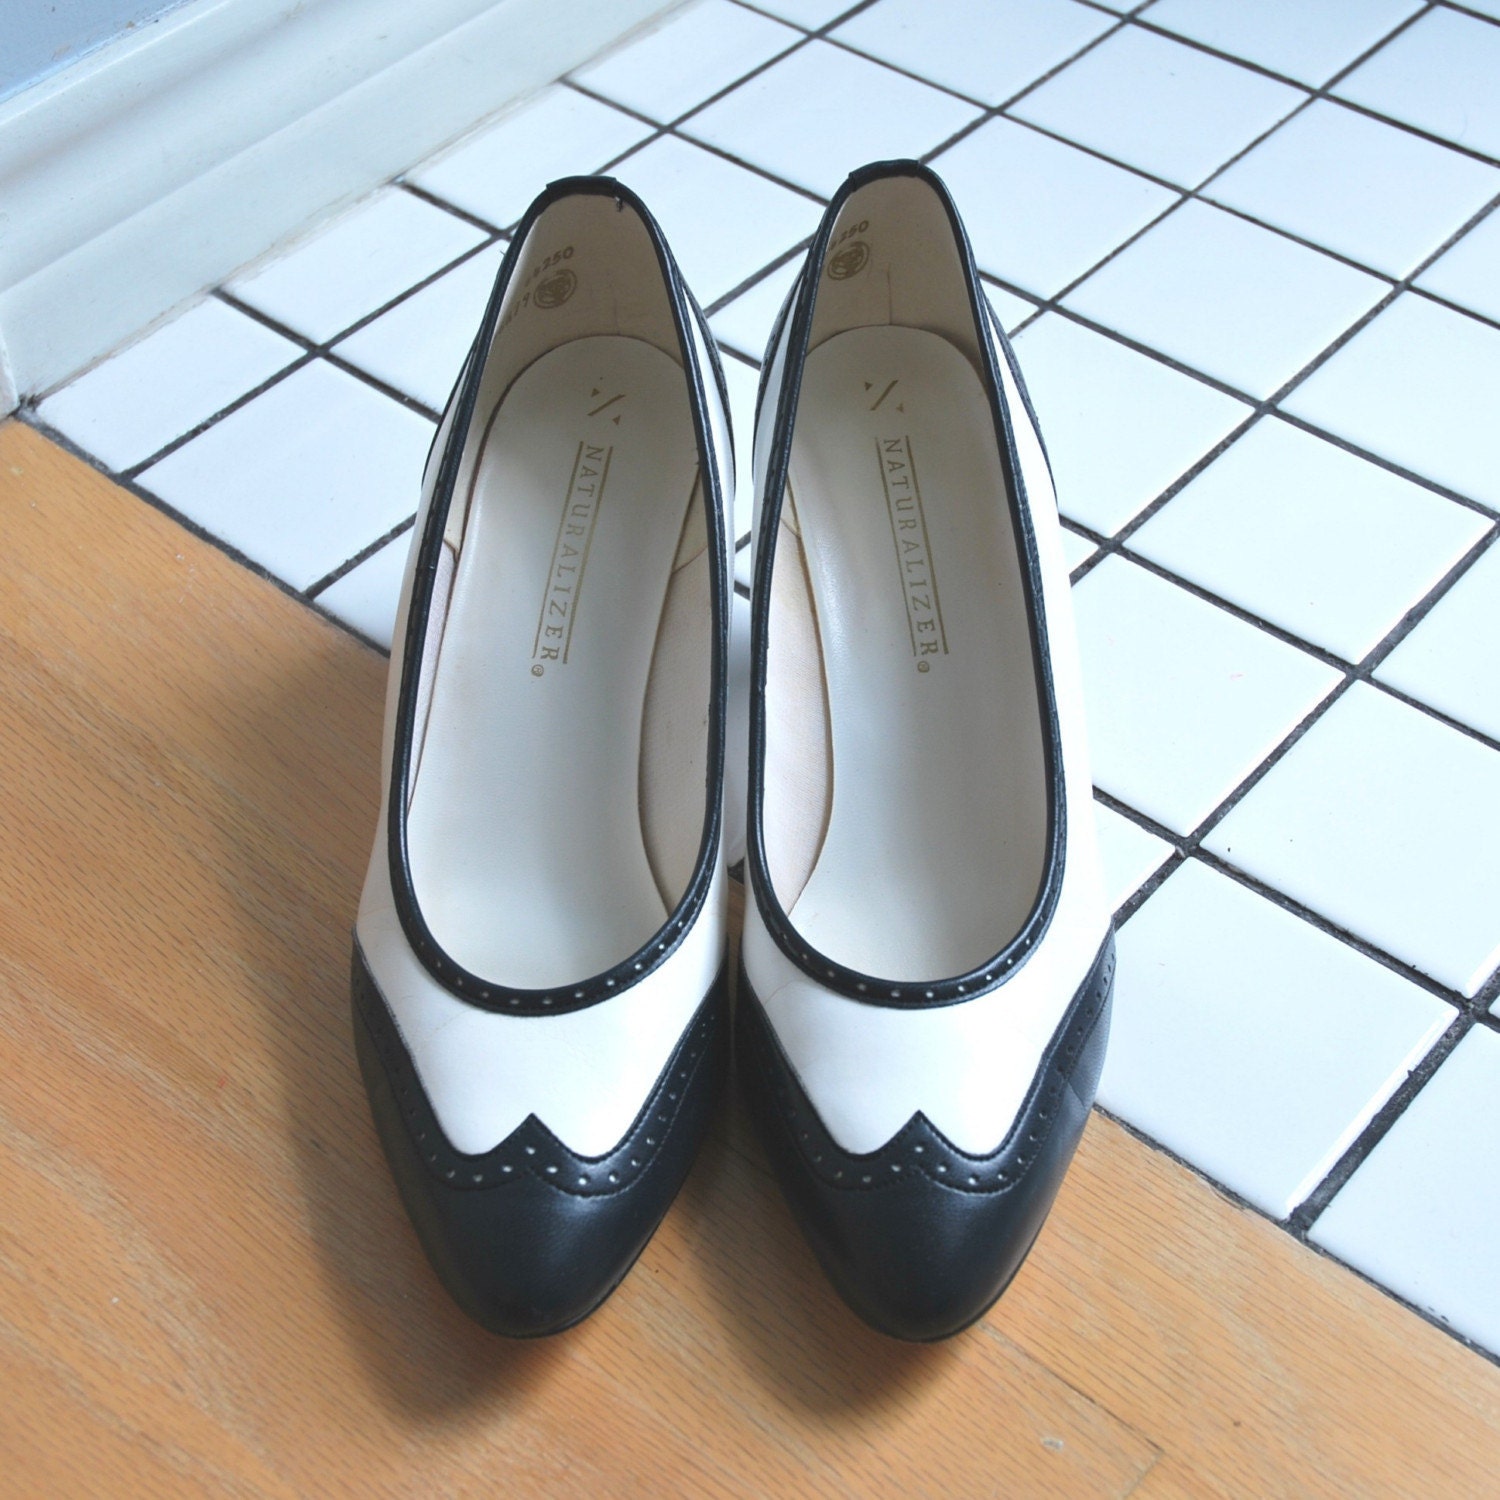 Navy and White Spectator Pumps size 8.5 by DianaDwainVintage